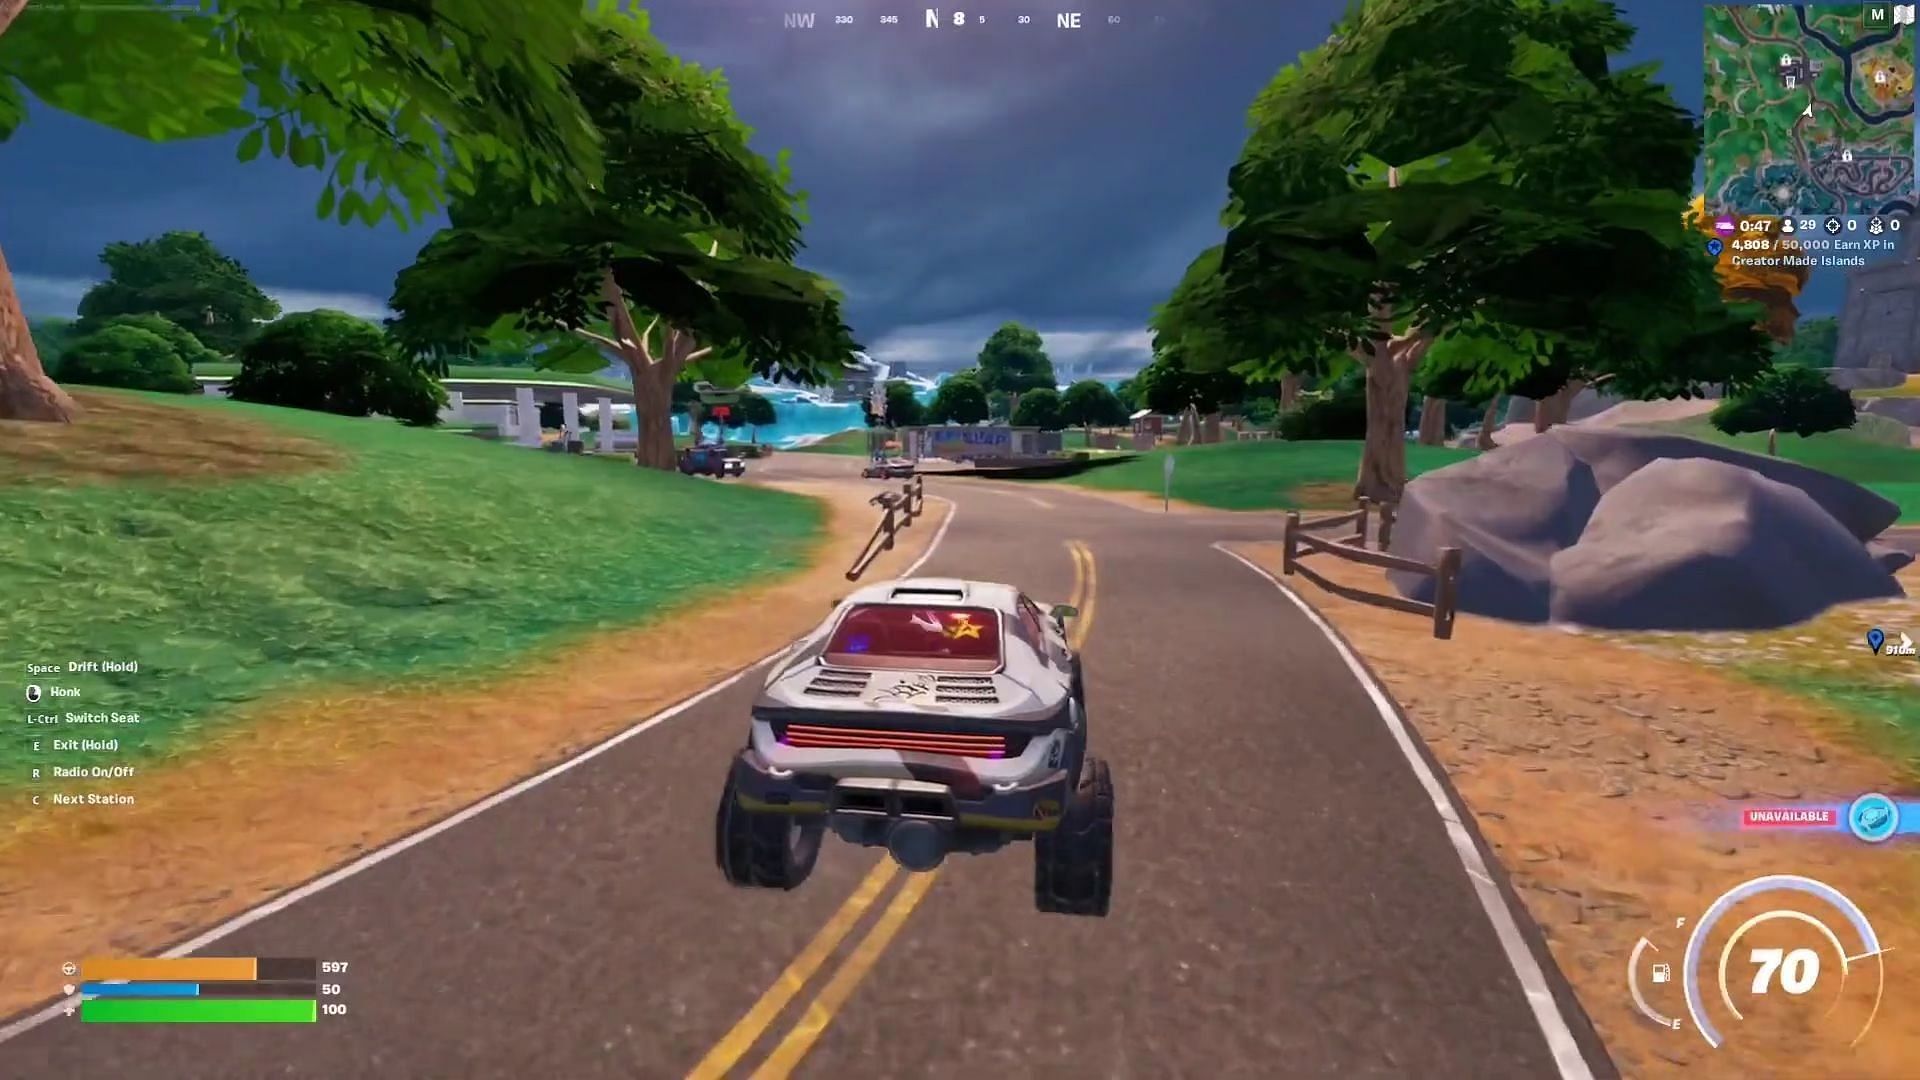 The new Fortnite vehicle is perfect for drifting (Image via Epic Games)